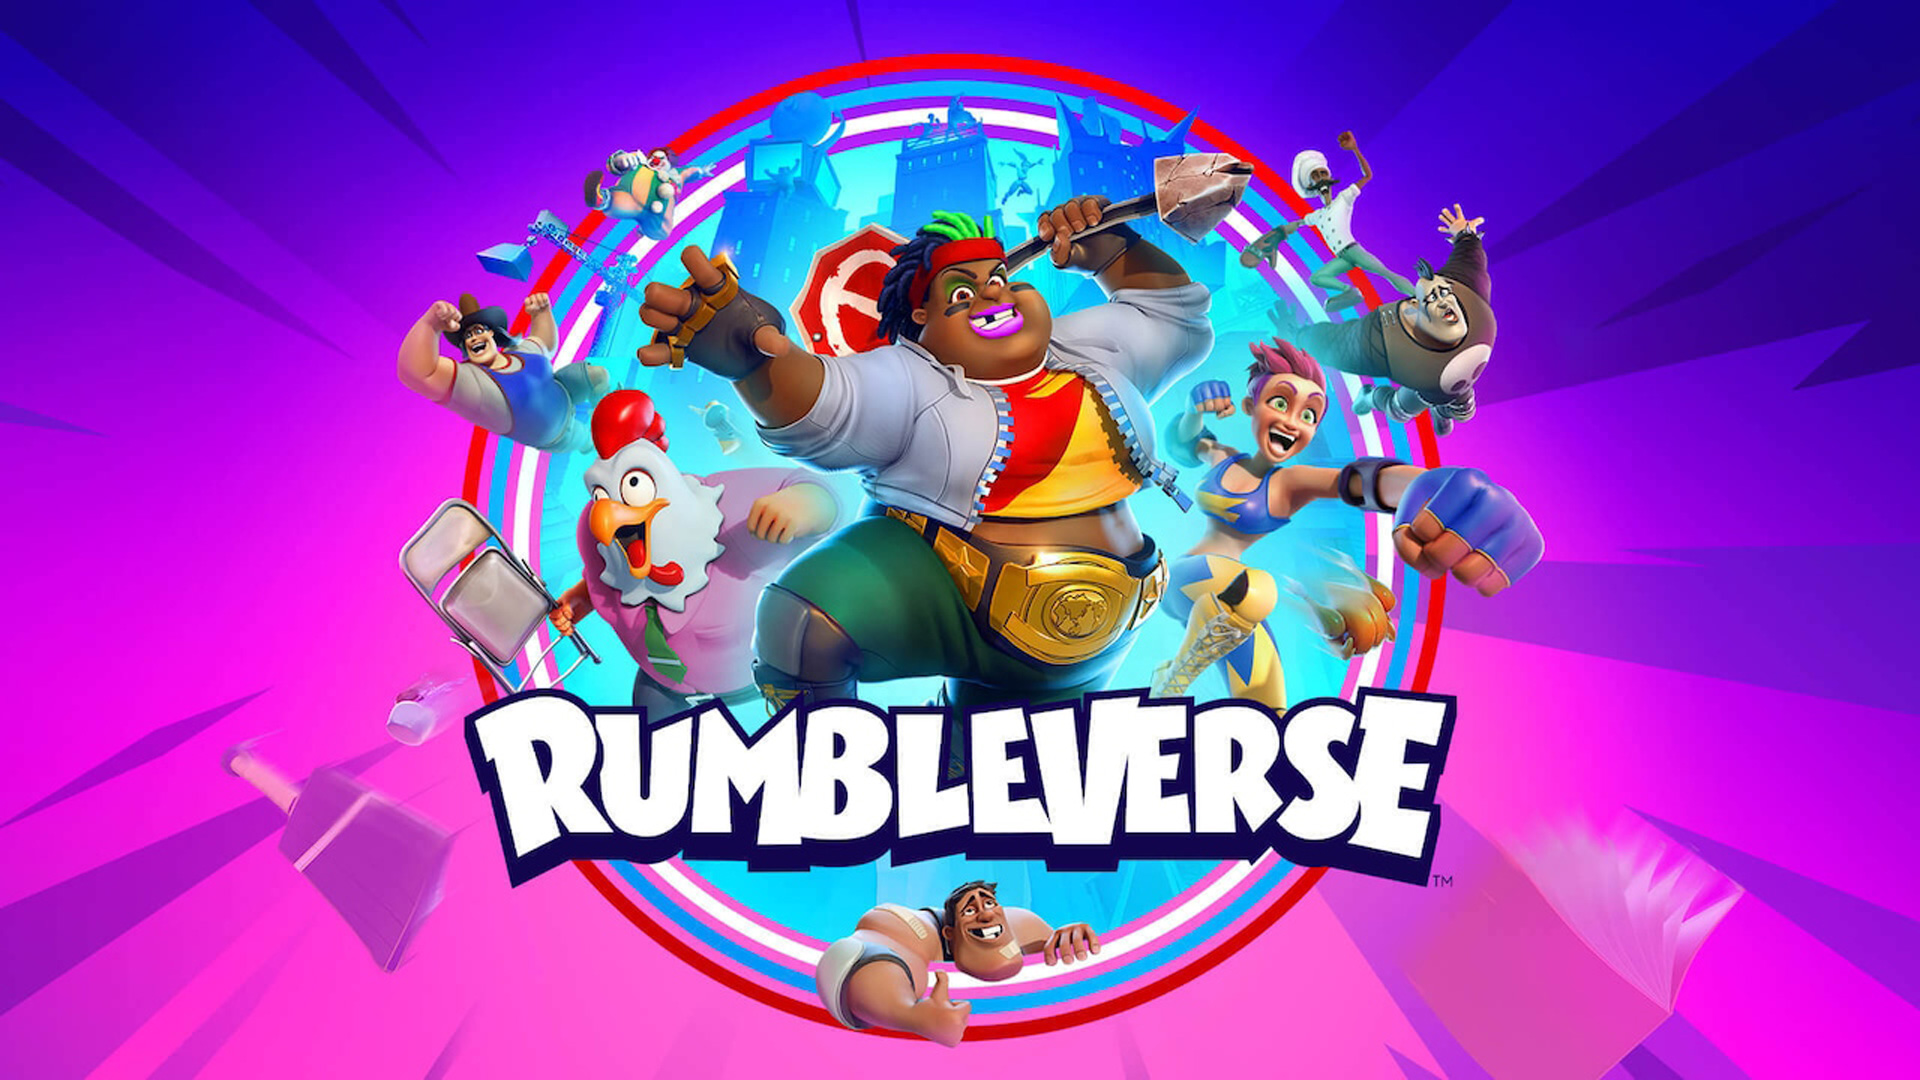 How to add friends on Rumbleverse?